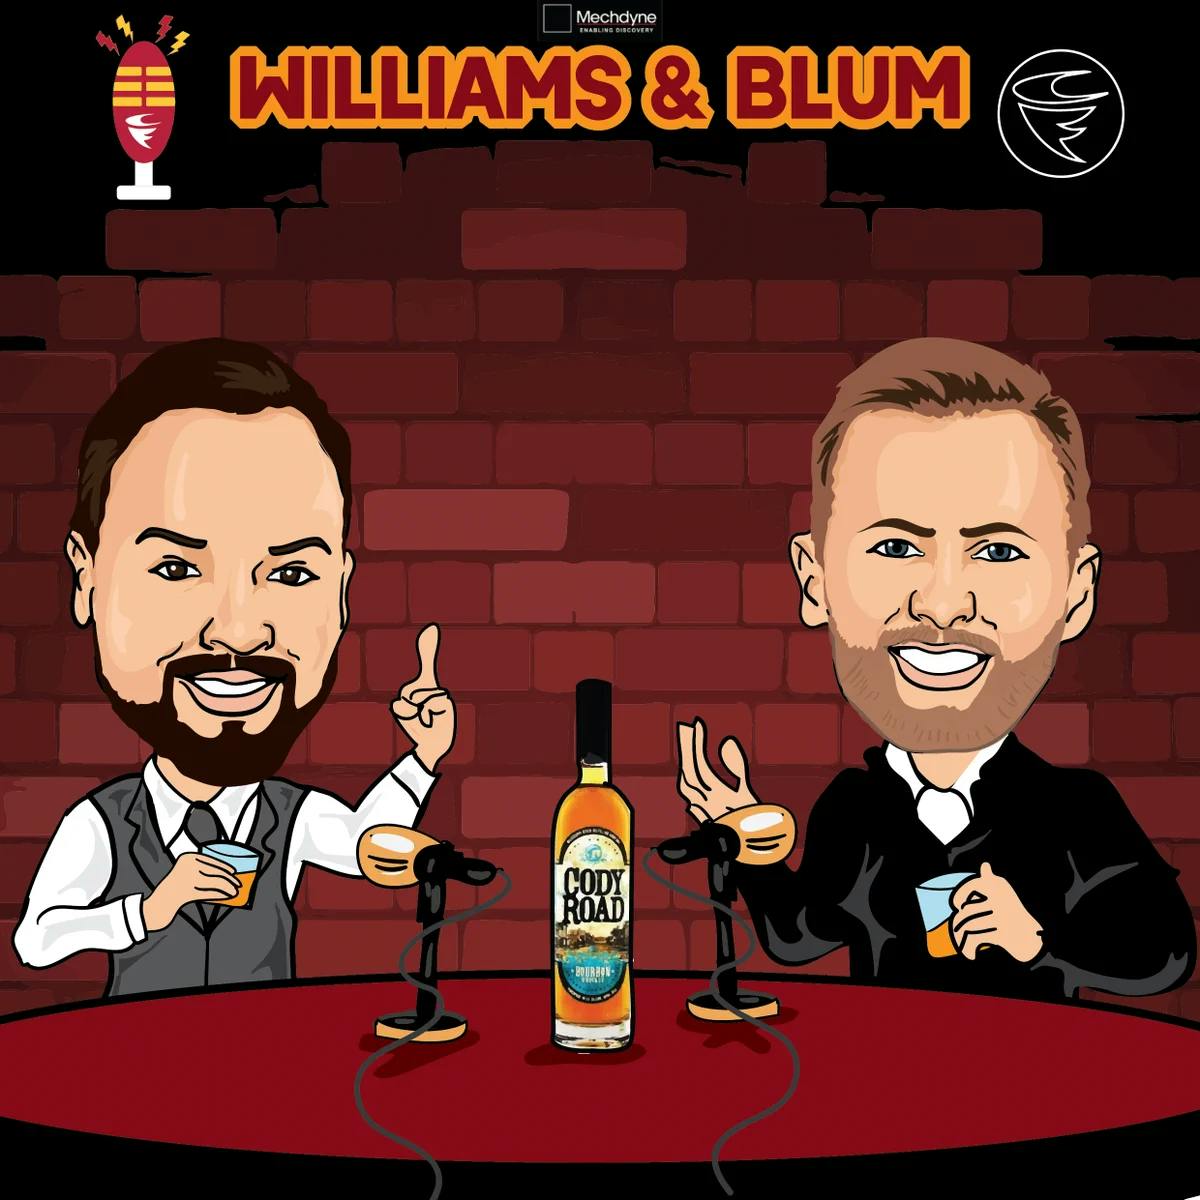 Williams & Blum: Let the madness begin